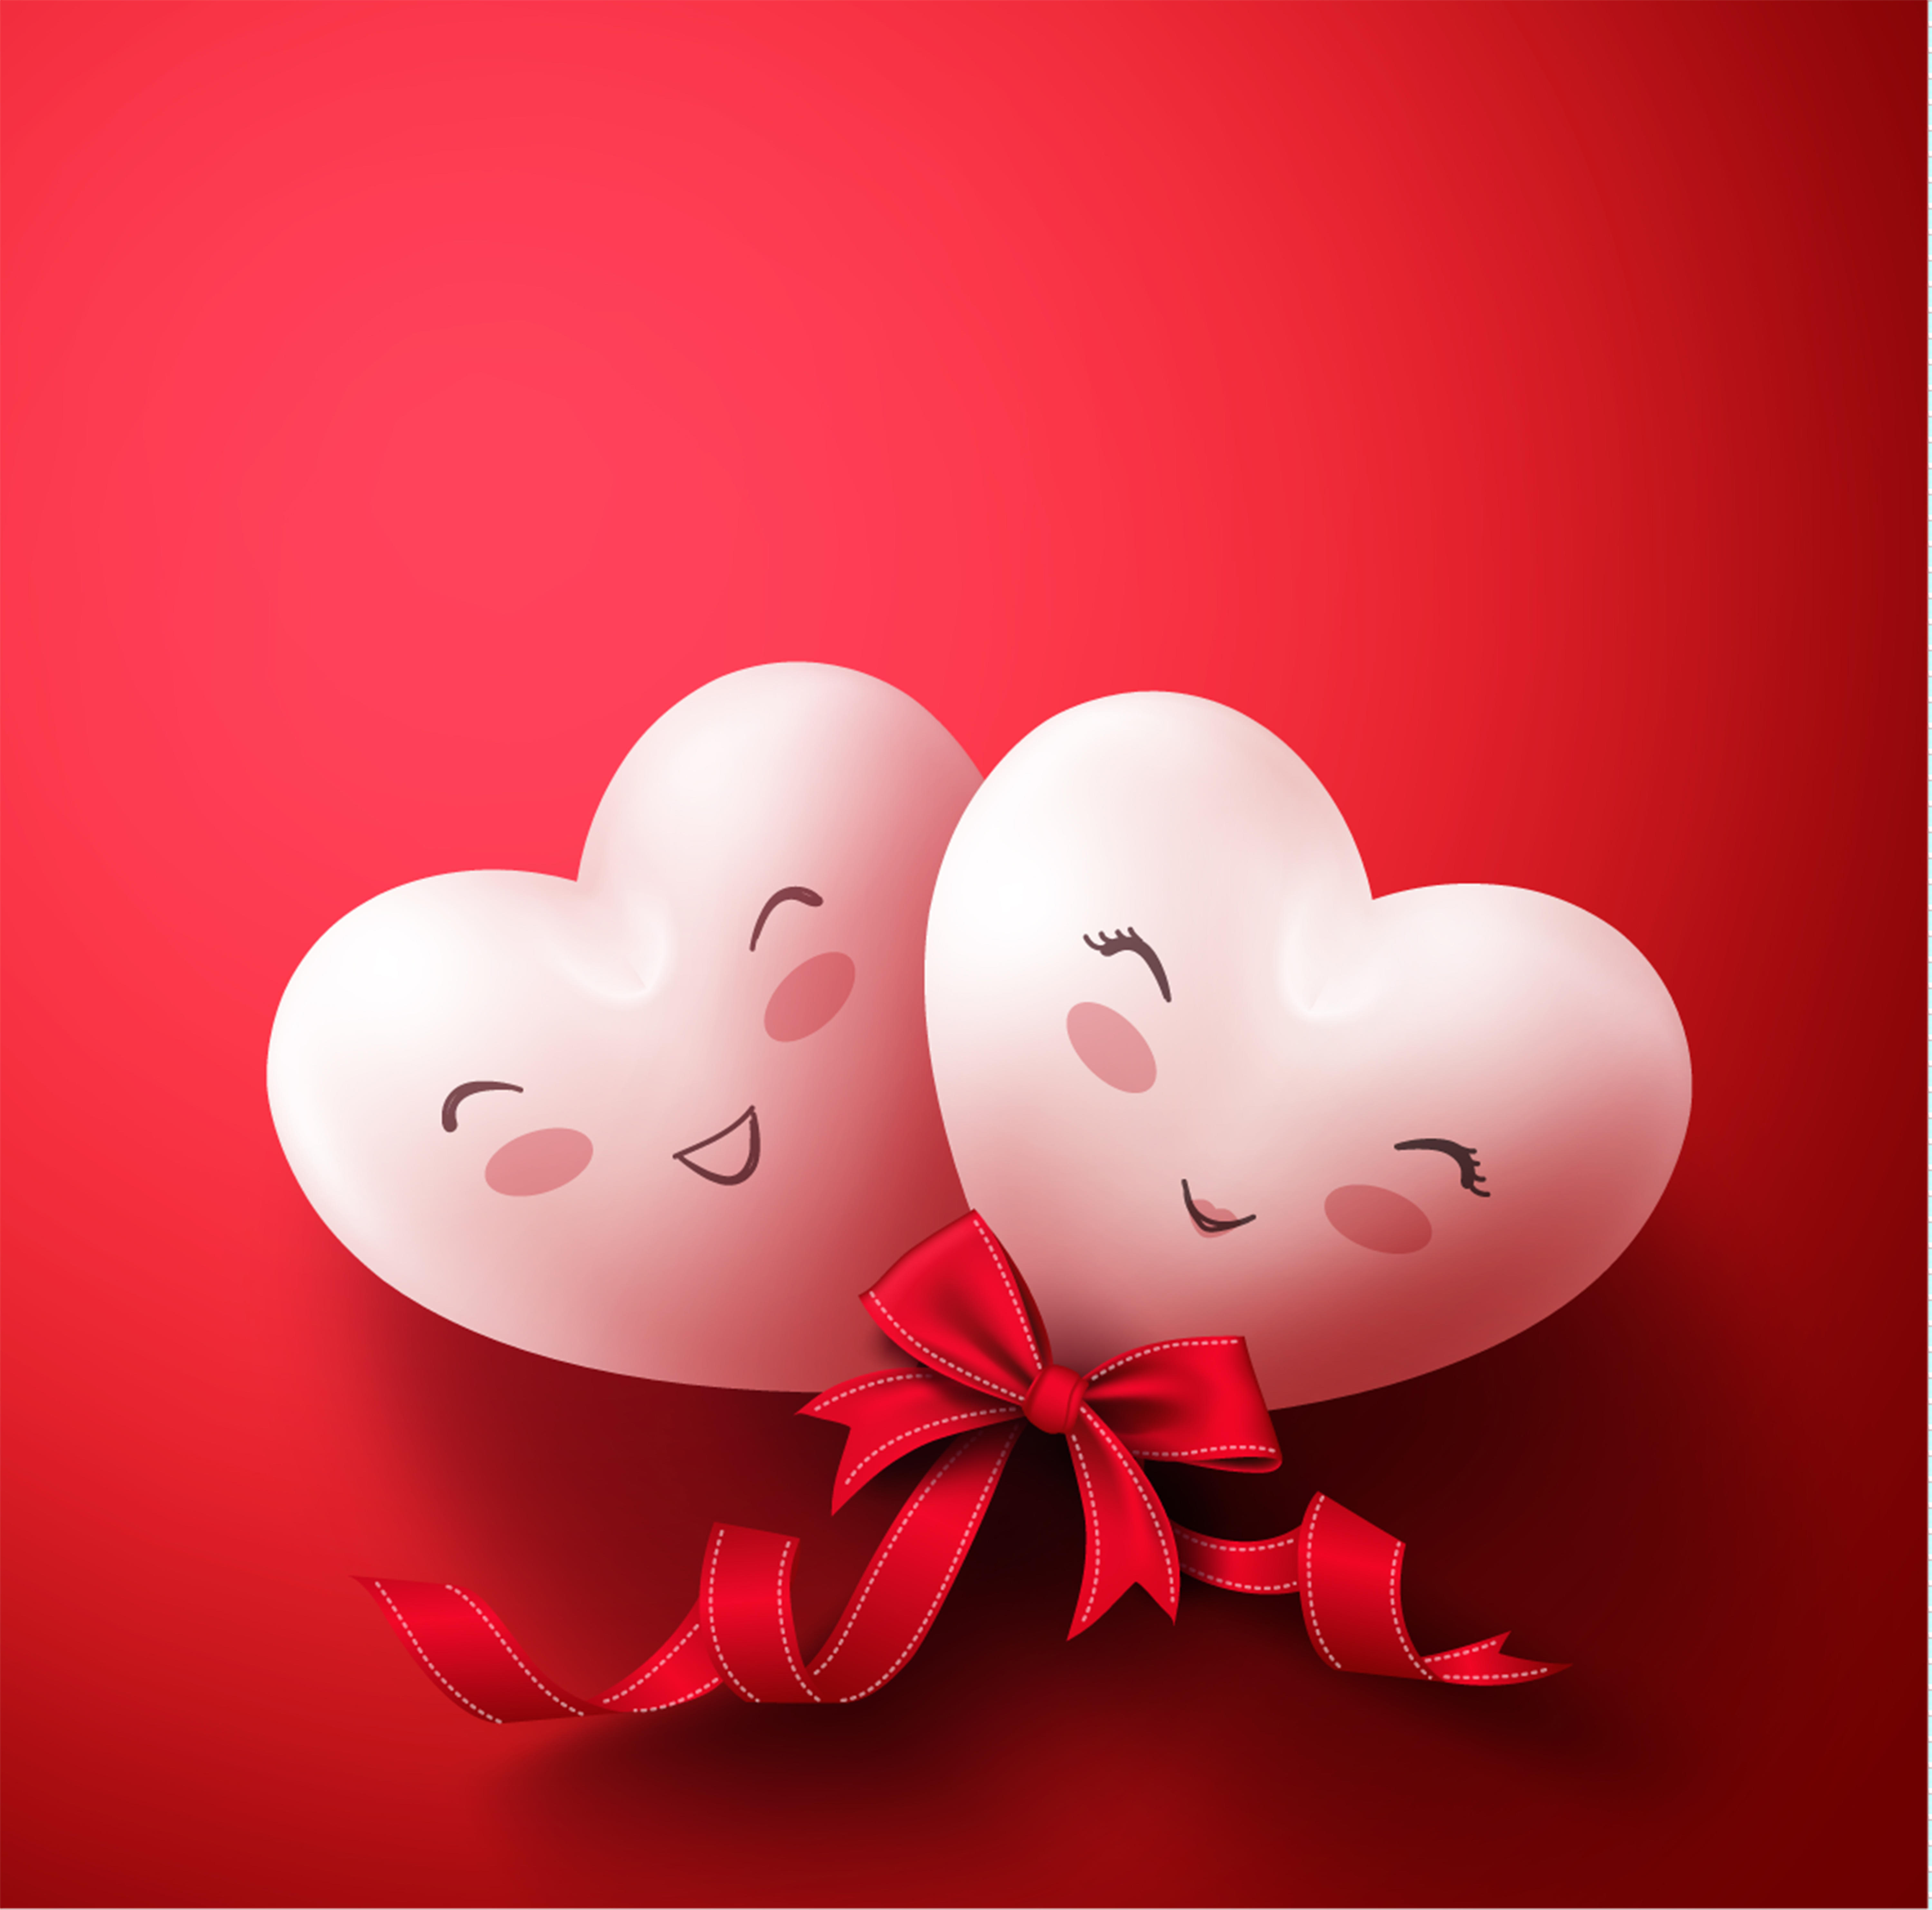 Wallpapers romantic hearts hearts a day of lovers on the desktop